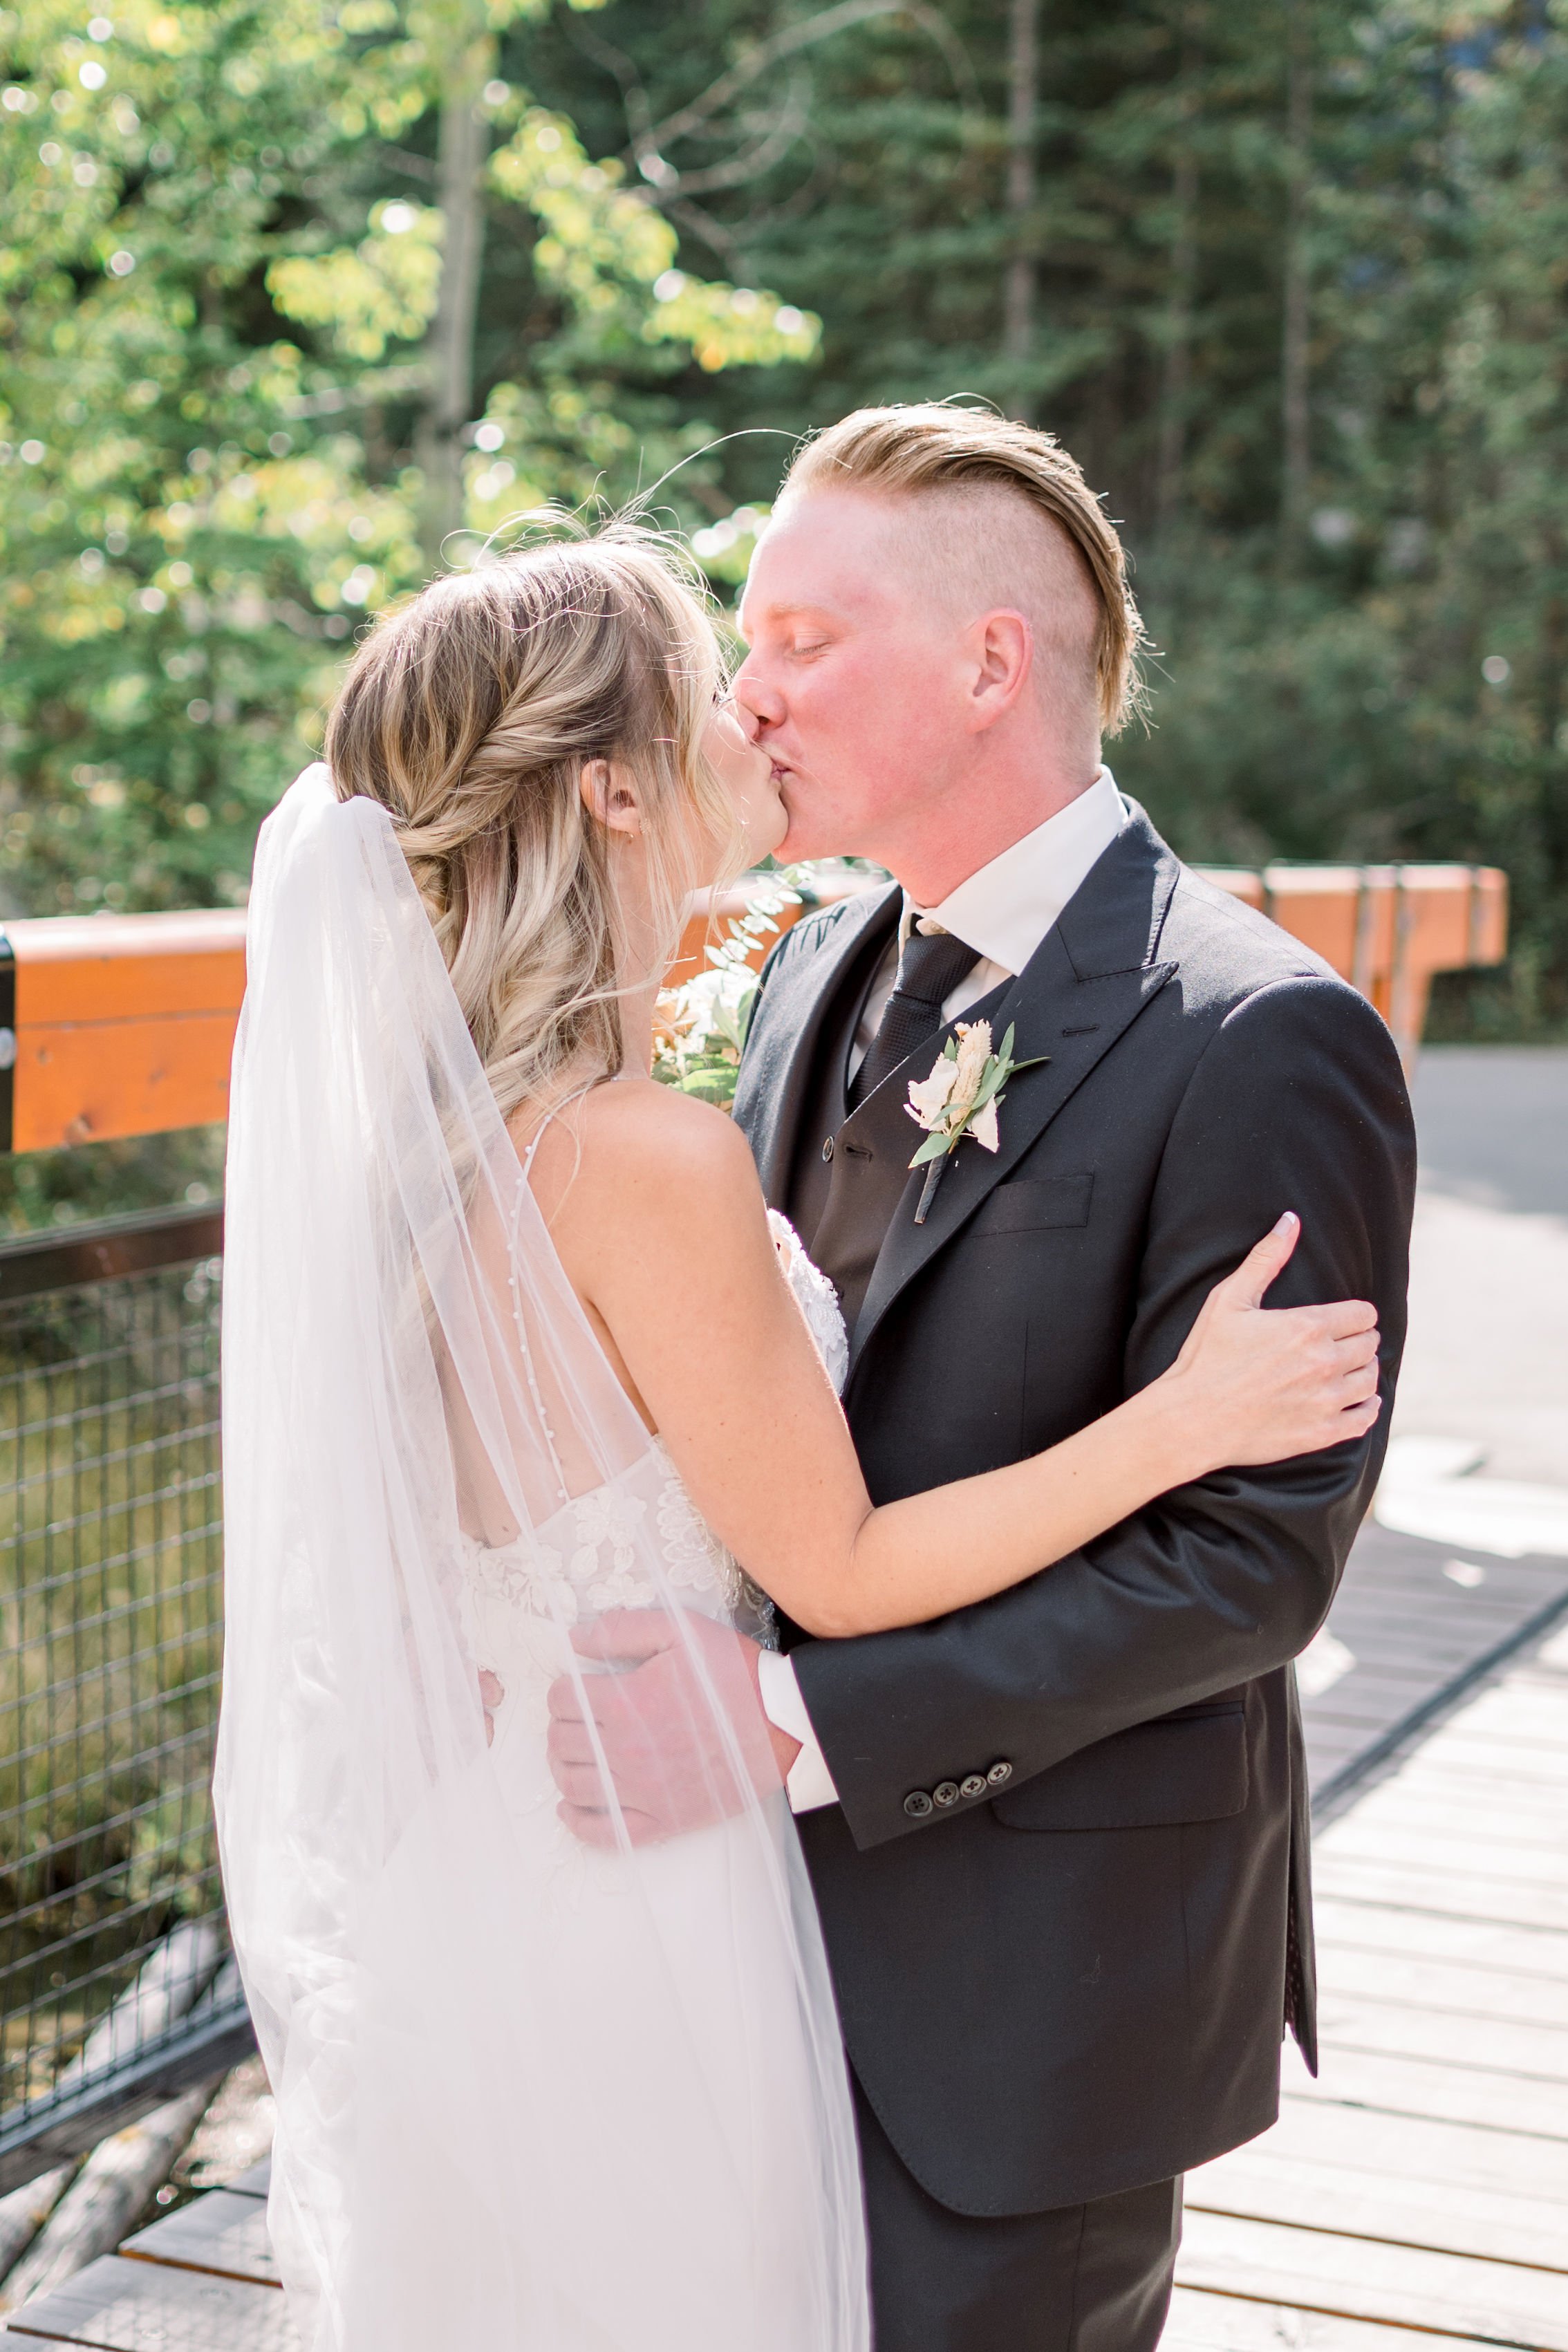  Newlyweds kiss on a summer day in the mountains of Banff by Chelsea Mason Photography. black suit and tie country wedding #Albertaweddings #shesaidyes #Albertaweddingphotographers #SilvertipGolfCourse #ChelseaMasonPhotography #ChelseaMasonWeddings  